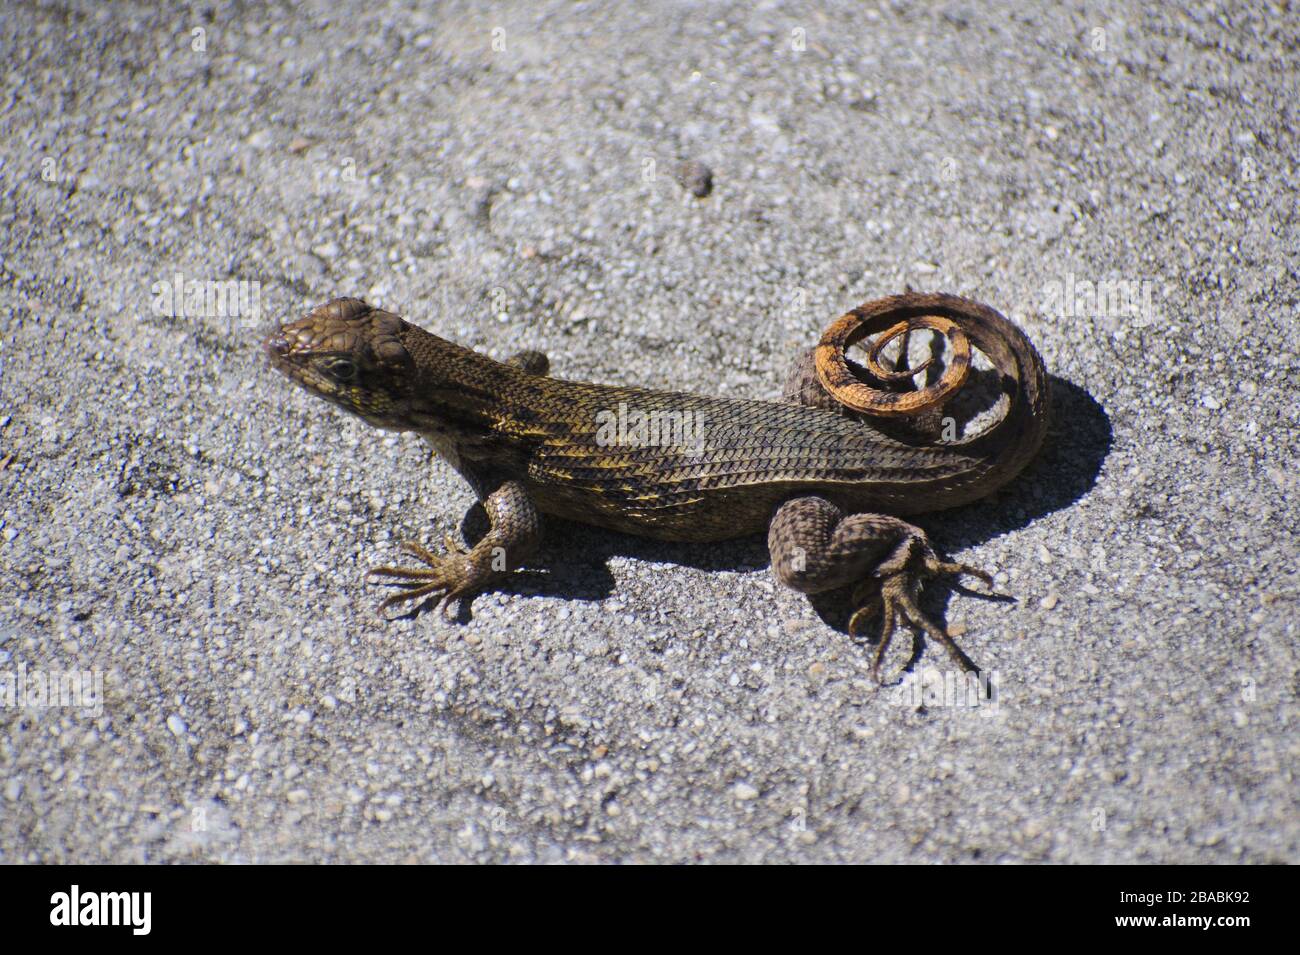 curly-tailed lizard on pavement Stock Photo